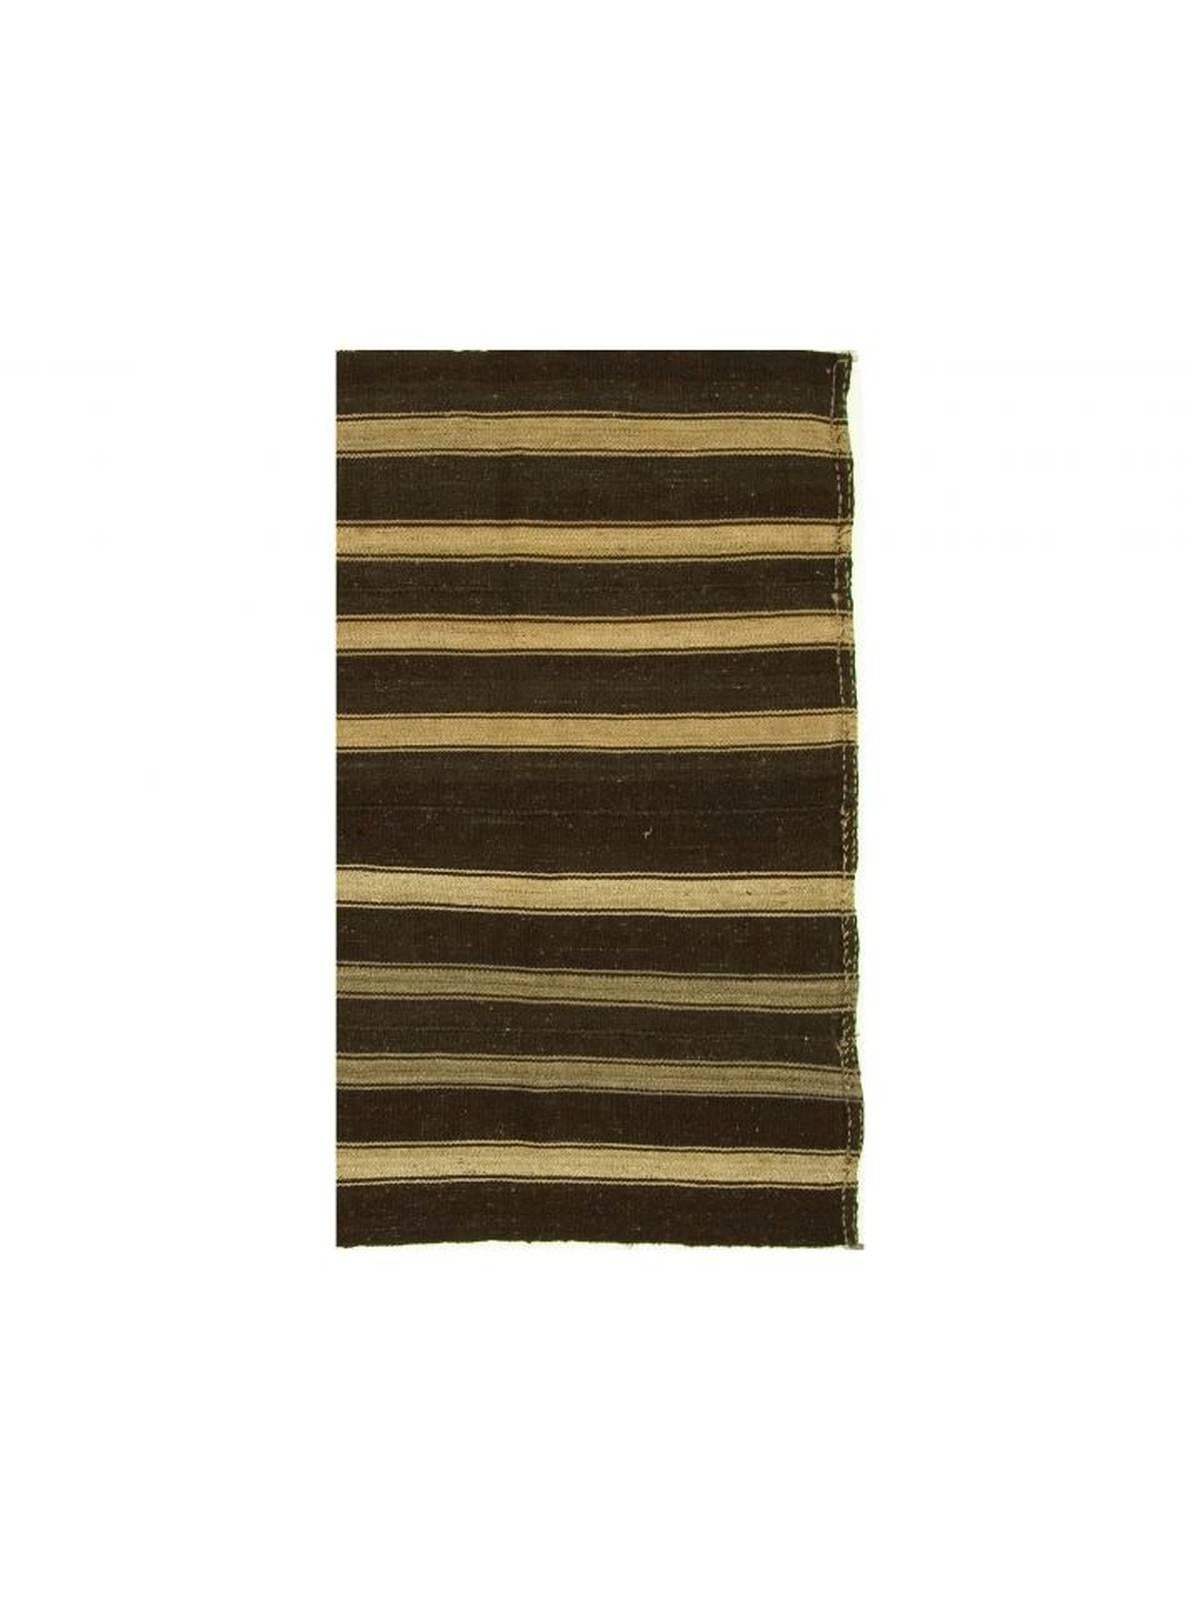 Vintage Turkish handwoven wool Kilim in chocolate brown with natural stripes.